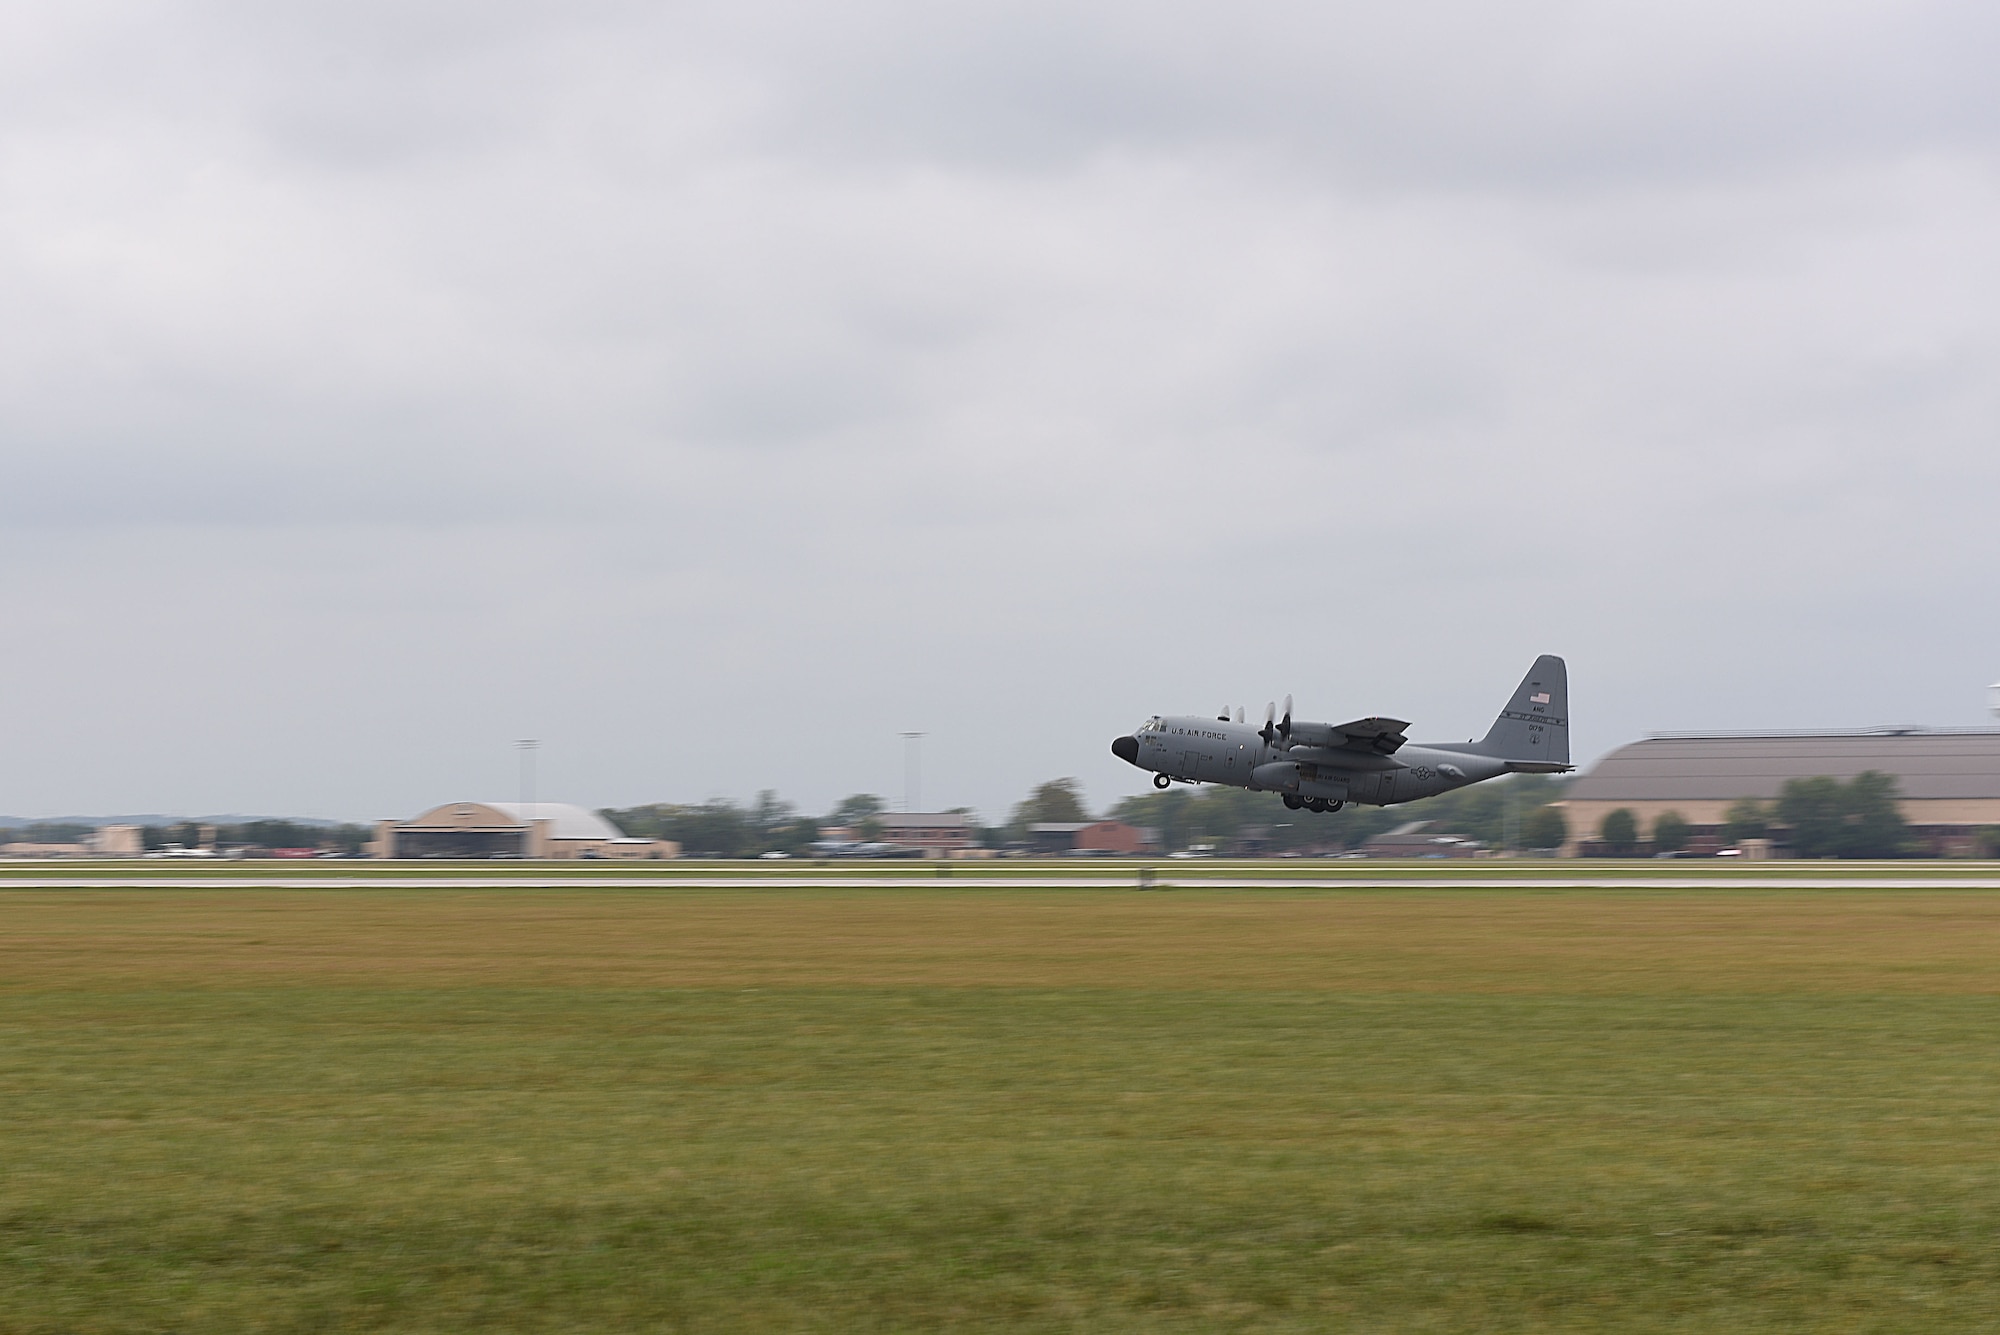 A C-130 lifts off the runway during take off at Scott Air Force Base, Illinois